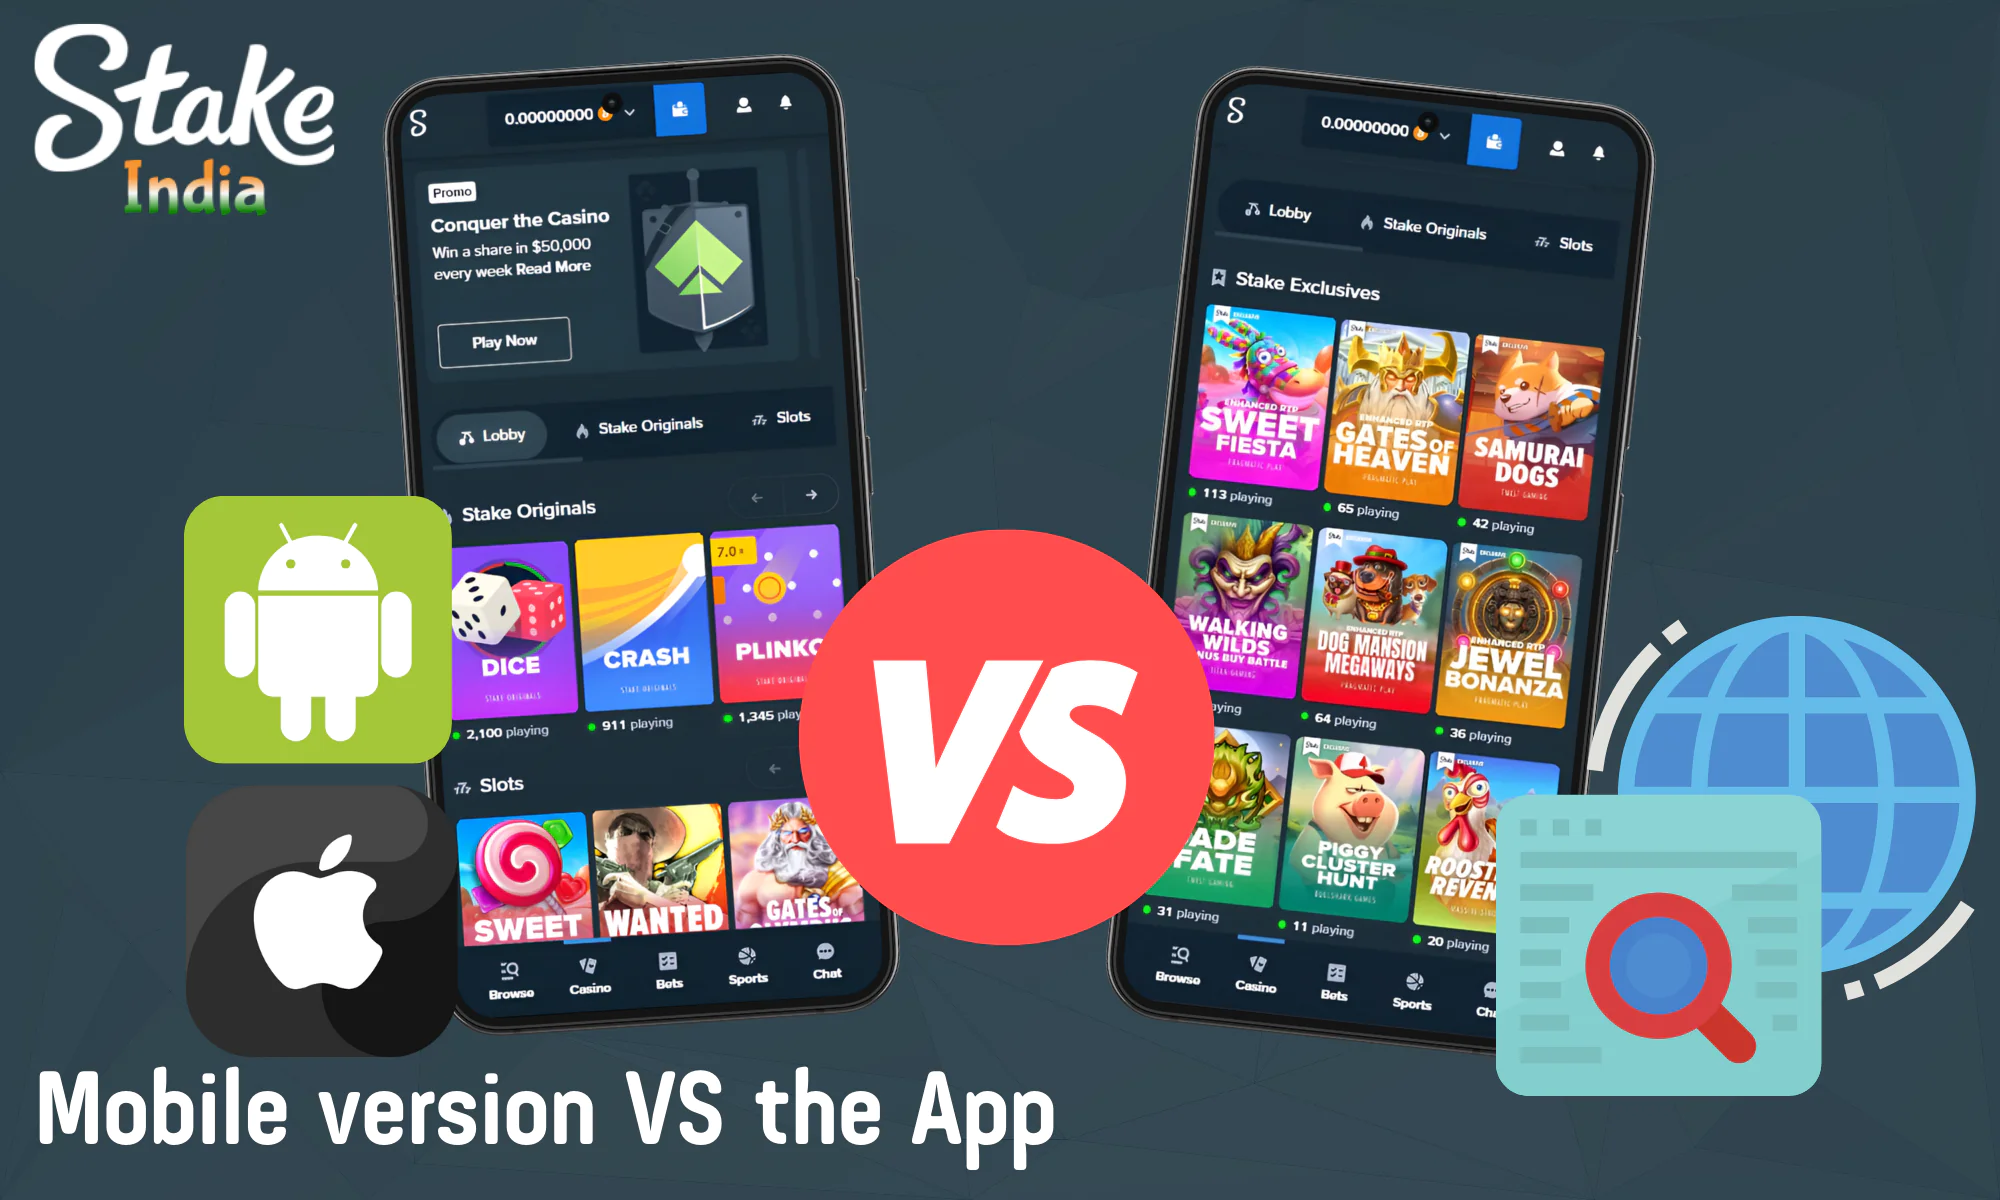 Comparison of the mobile version and the Stake app